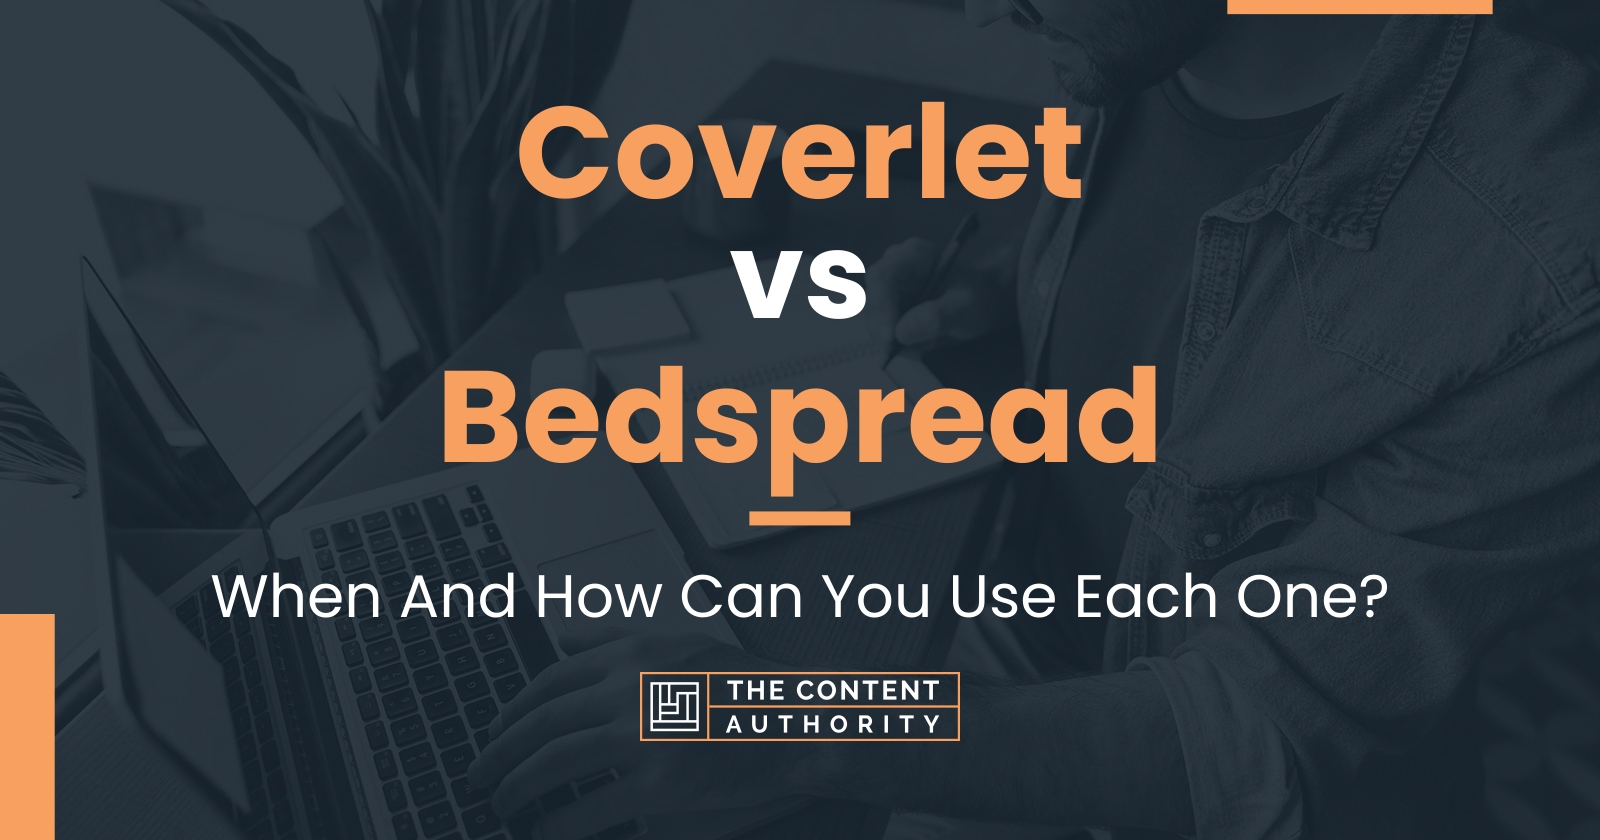 Coverlet vs Bedspread: When And How Can You Use Each One?